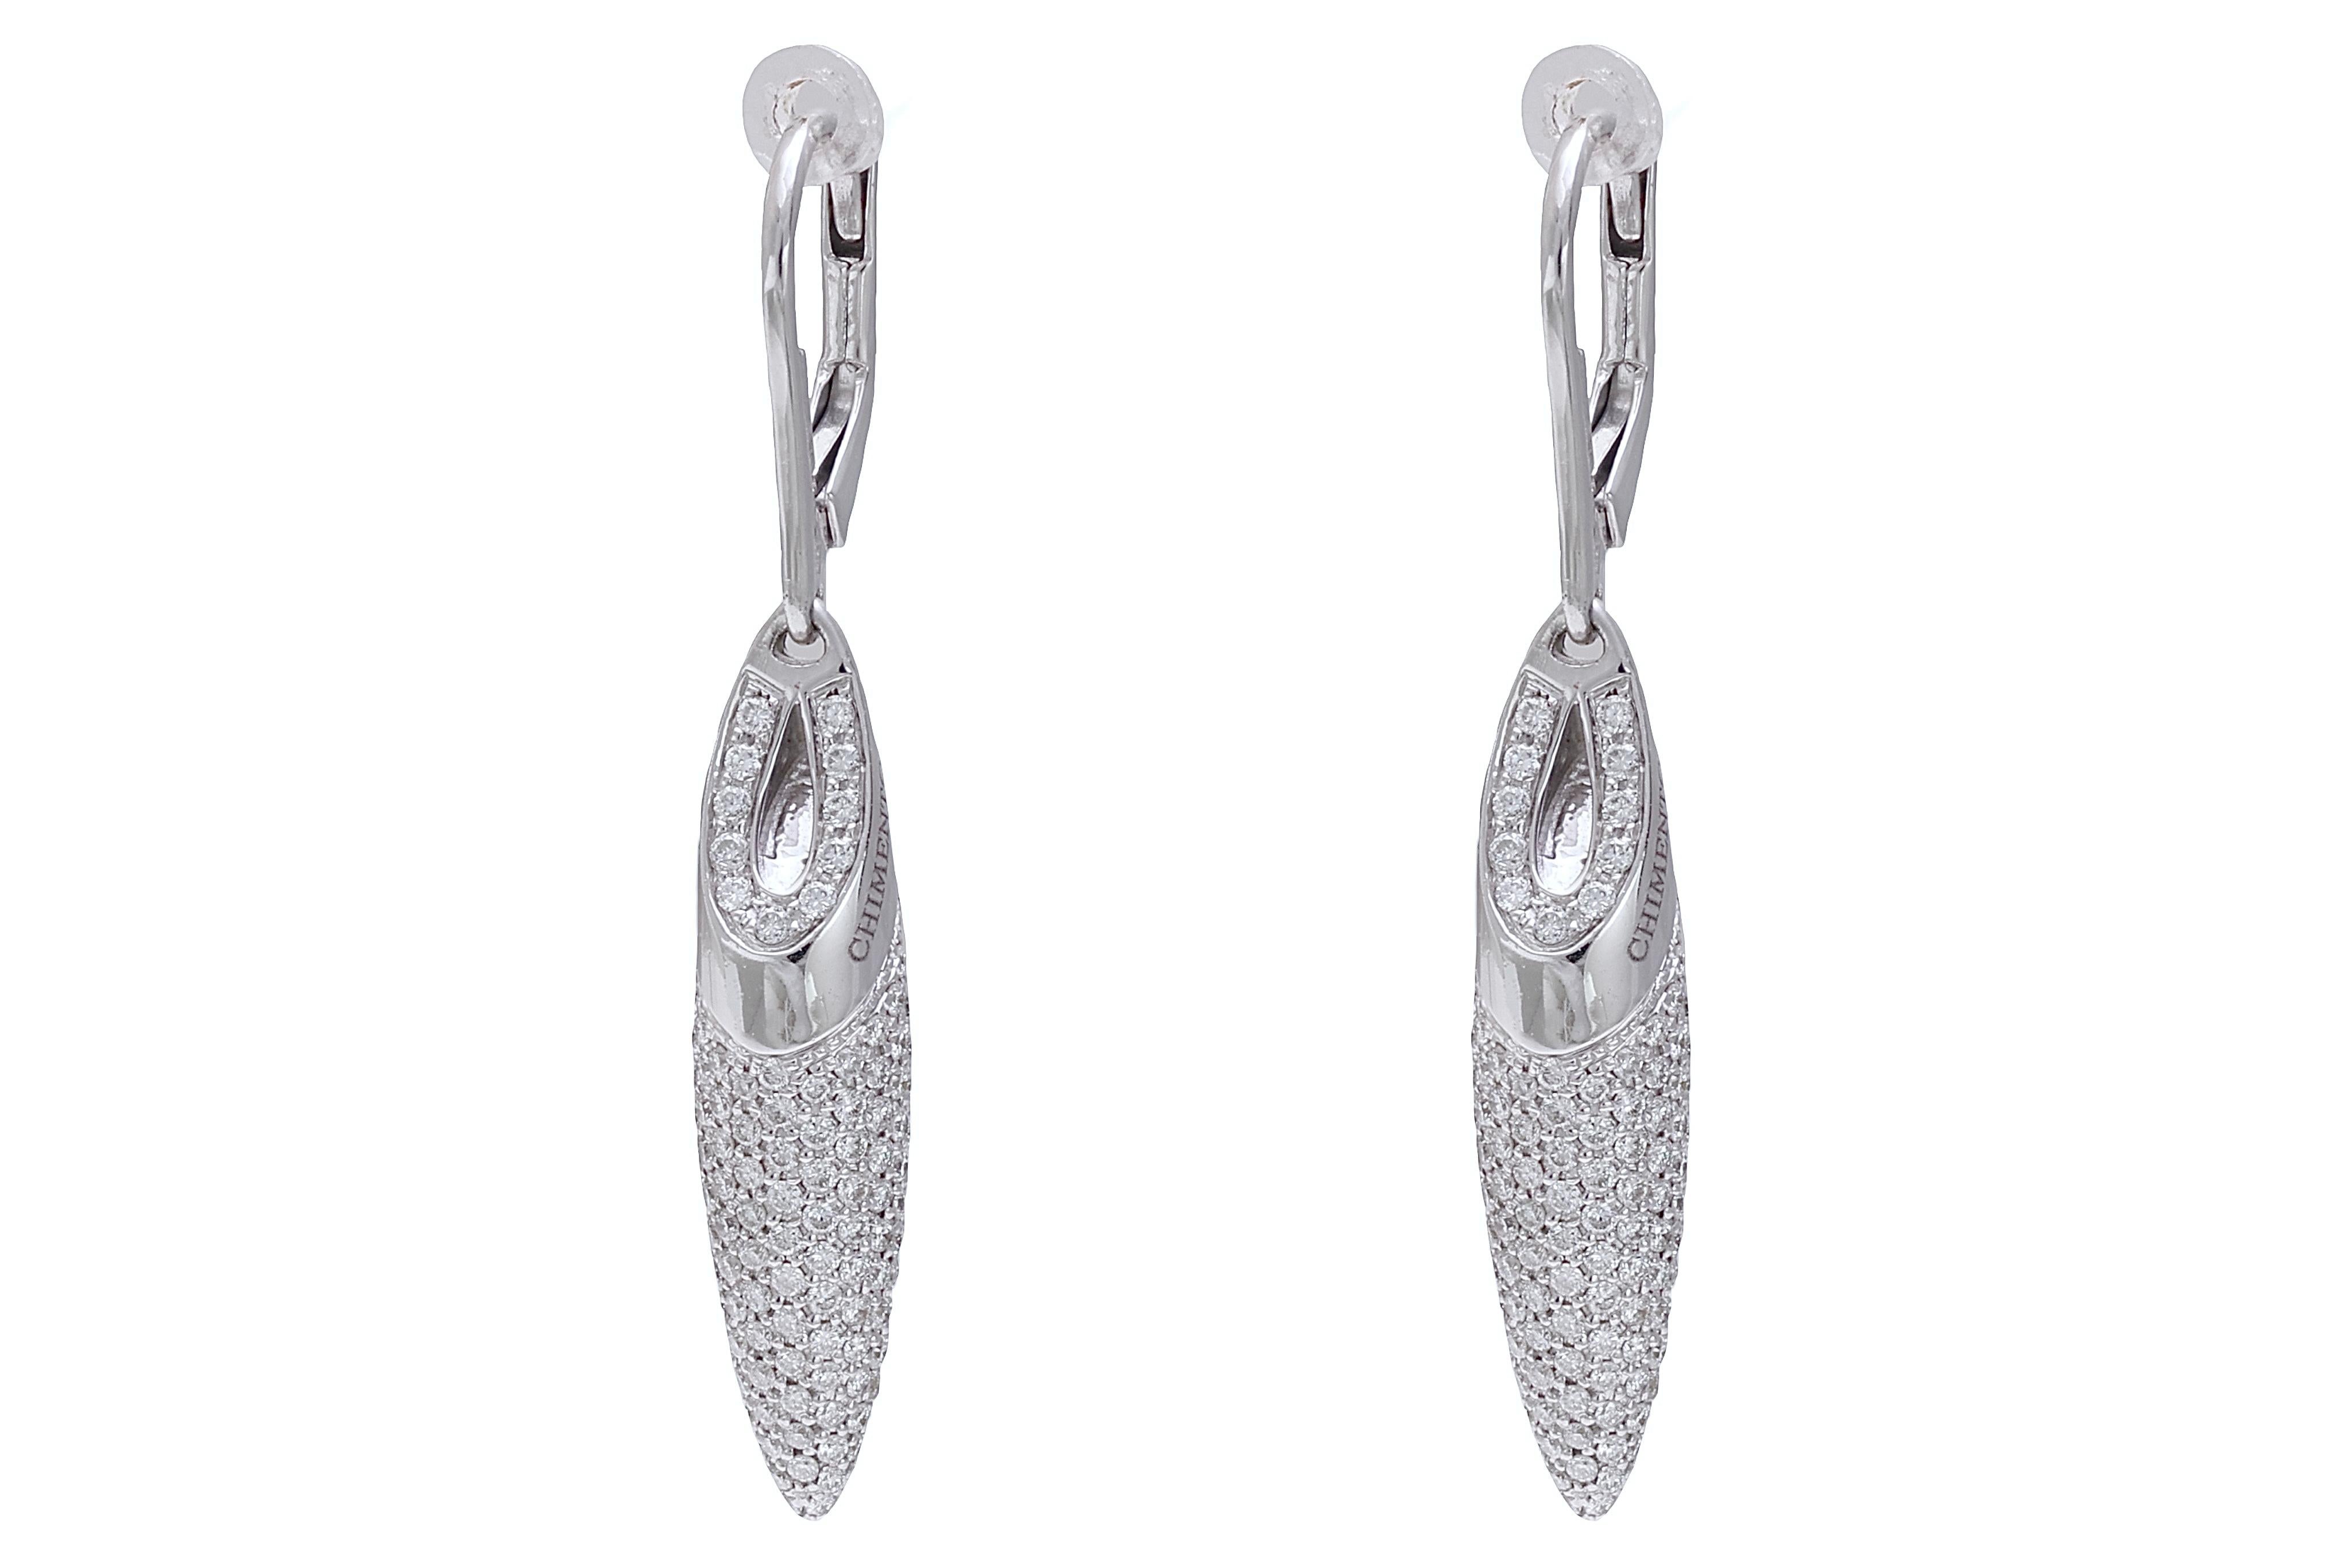 Gorgeous 18 kt. White Gold Chimento Dangle Earrings With 2.6 ct. Diamond

Diamonds: brilliant cut diamonds, together 2.6 ct.

Material: 18 kt. white gold

Measurements: 41.2 mm x 6.2 mm x 6.4 mm

Total weight: 9.8 gram / 0.345 oz / 6.3 dwt